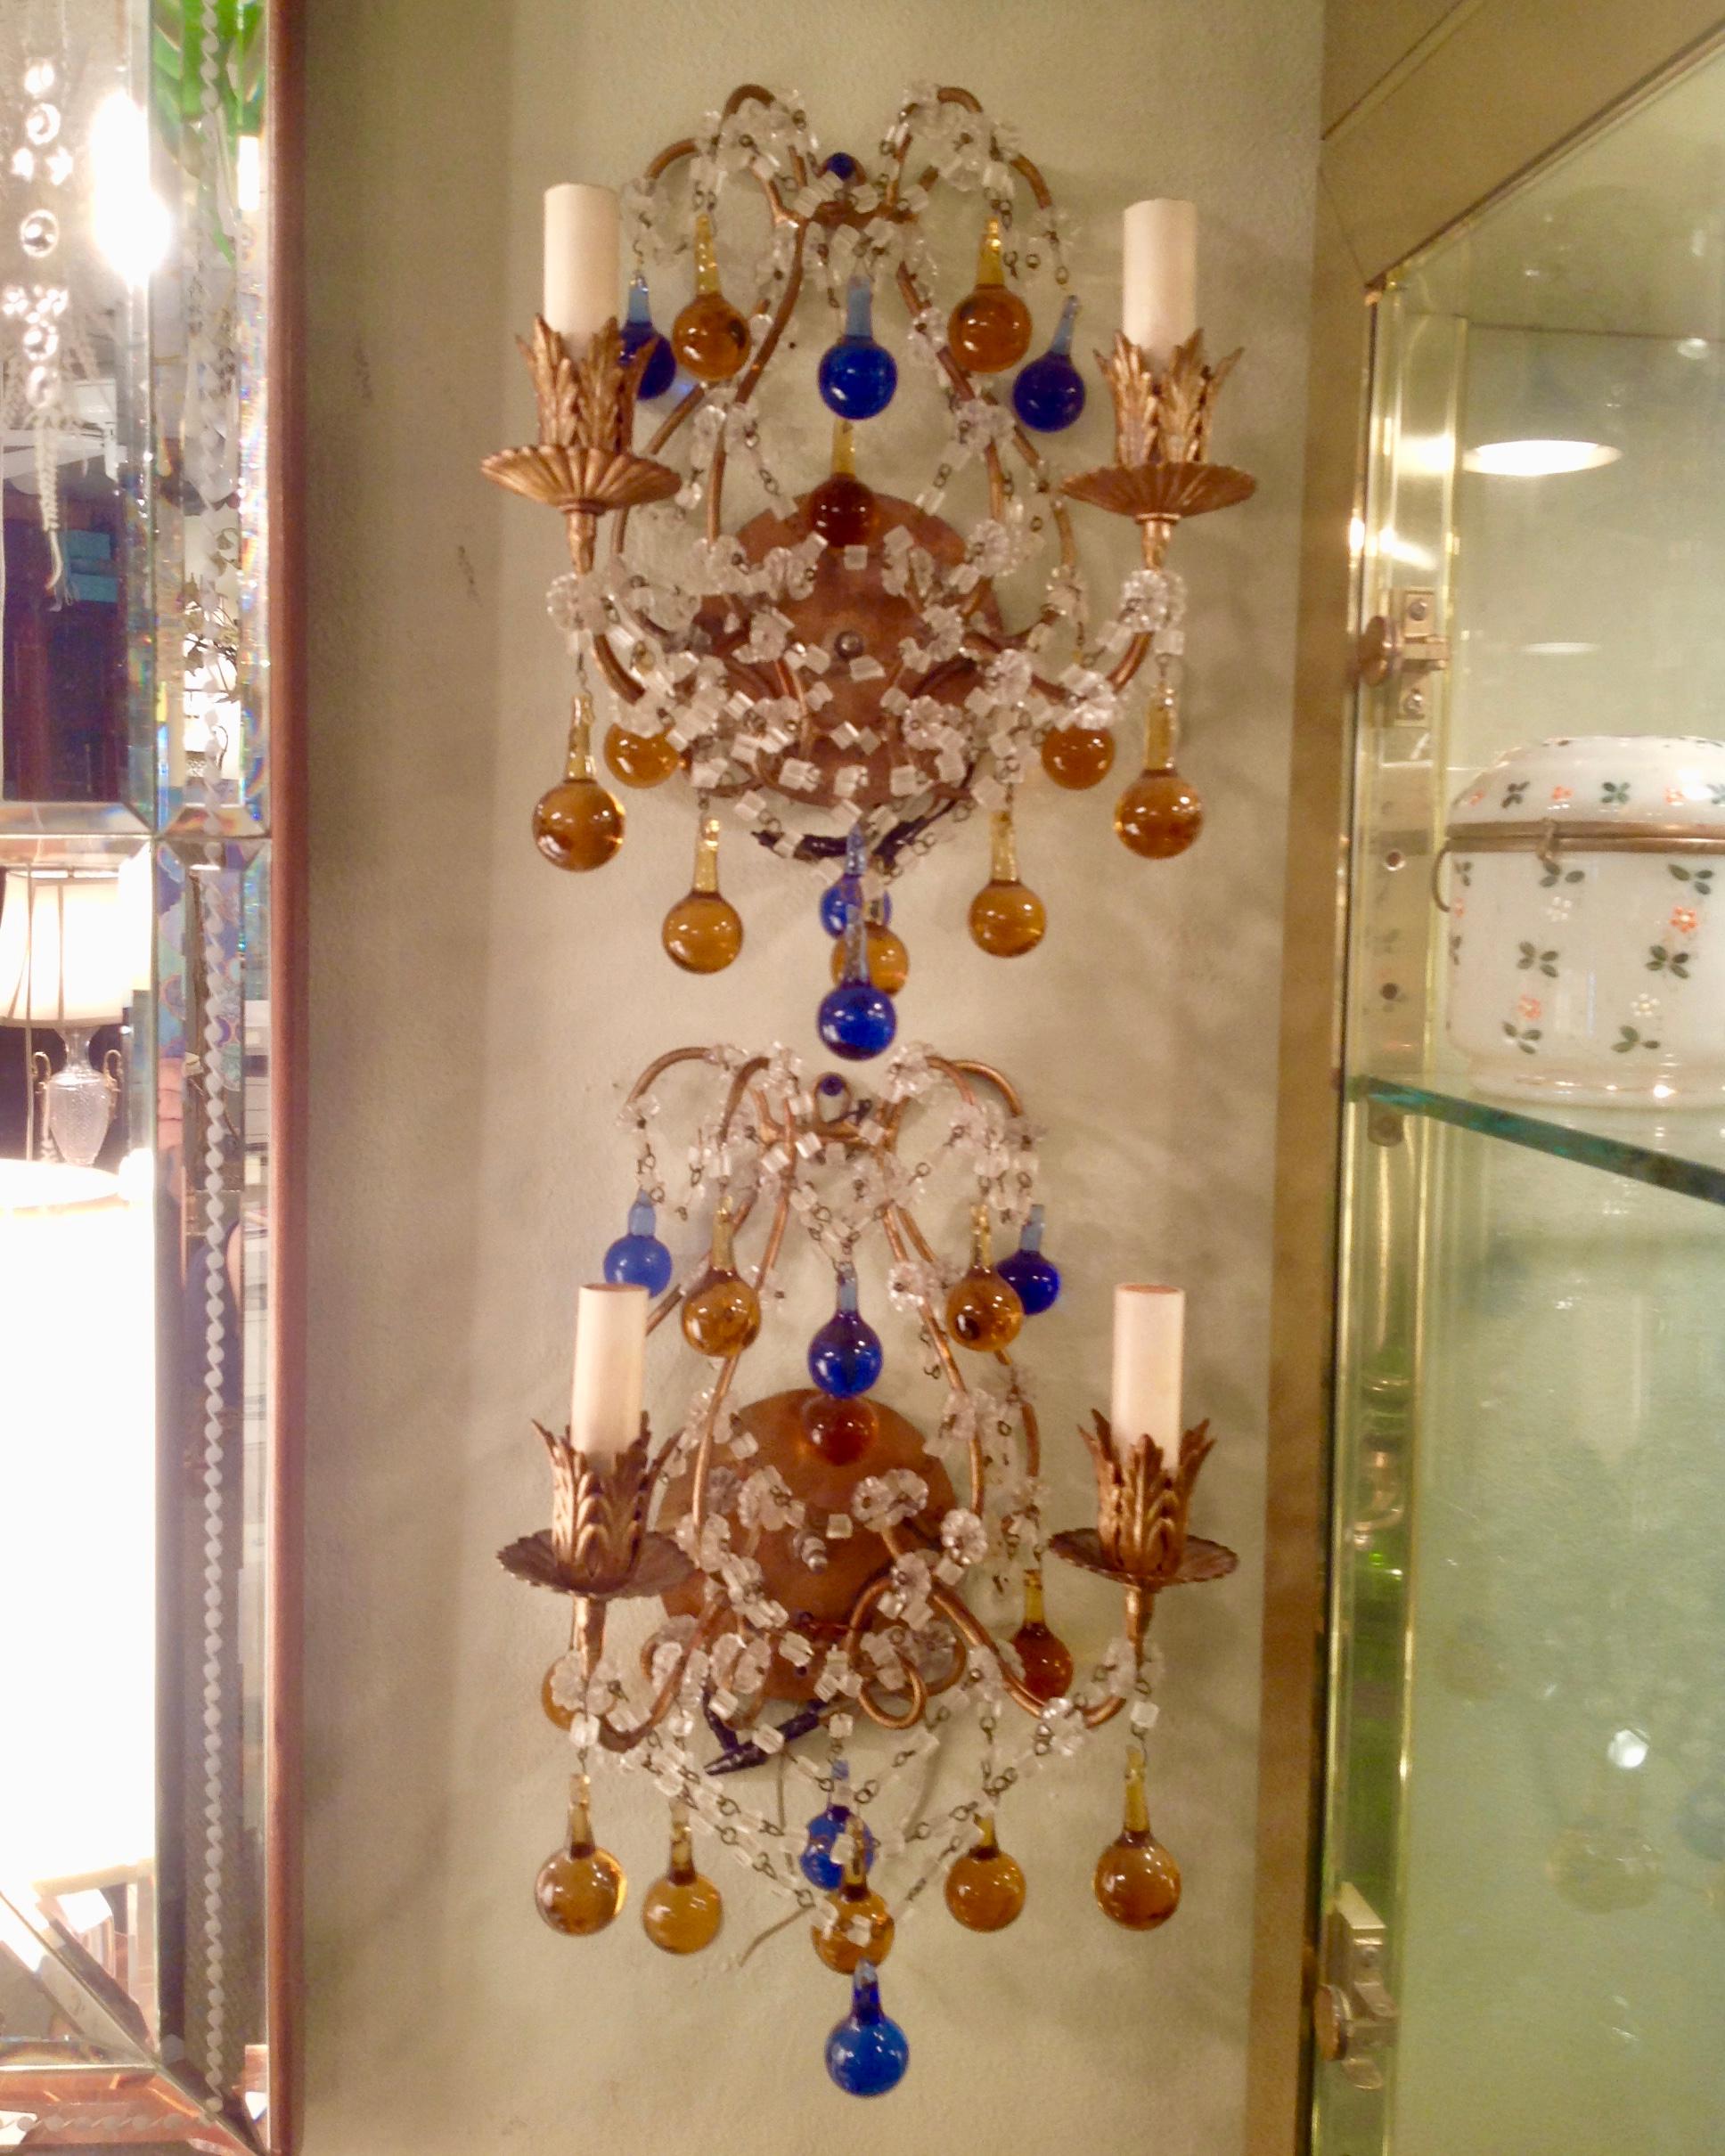 Rich royal blue and amber colors. A dramatic and colorful pair of Italian sconces.
A stunningly beautiful and dramatic pair - electrified. Nicely scaled.